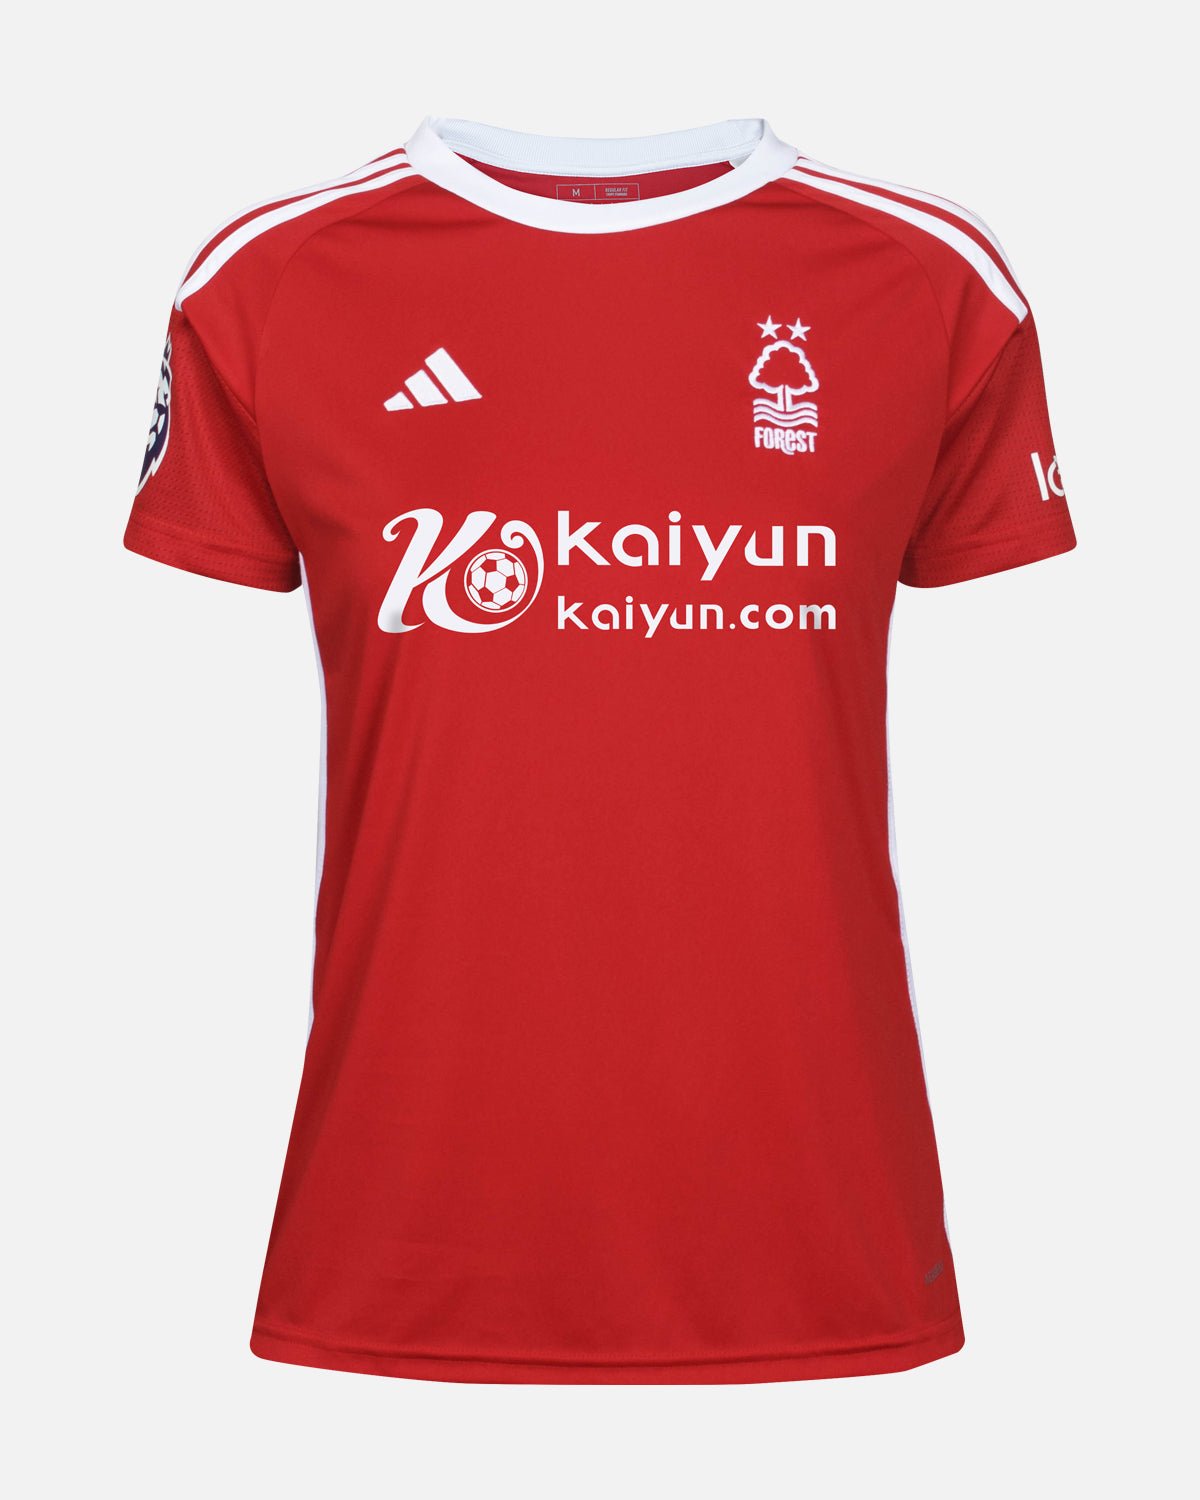 NFFC Women's Home Shirt 23-24 - Toffolo 15 - Nottingham Forest FC